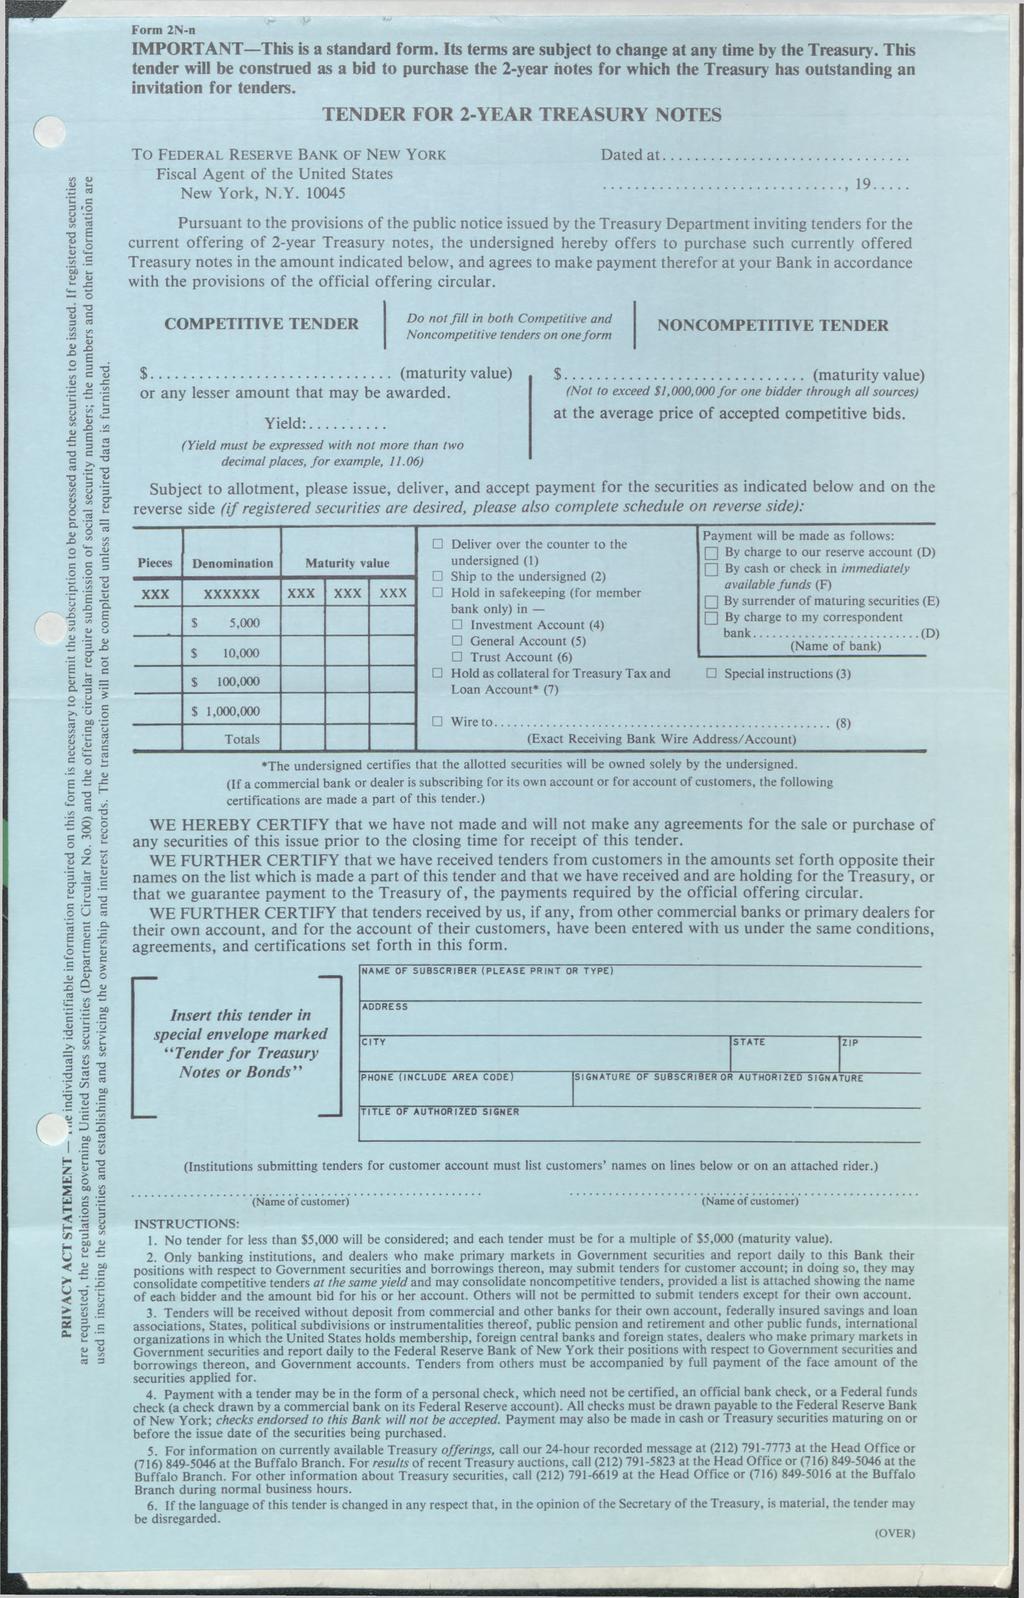 Form 2N-n IMPORTANT This is a standard form. Its terms are subject to change at any time by the Treasury.